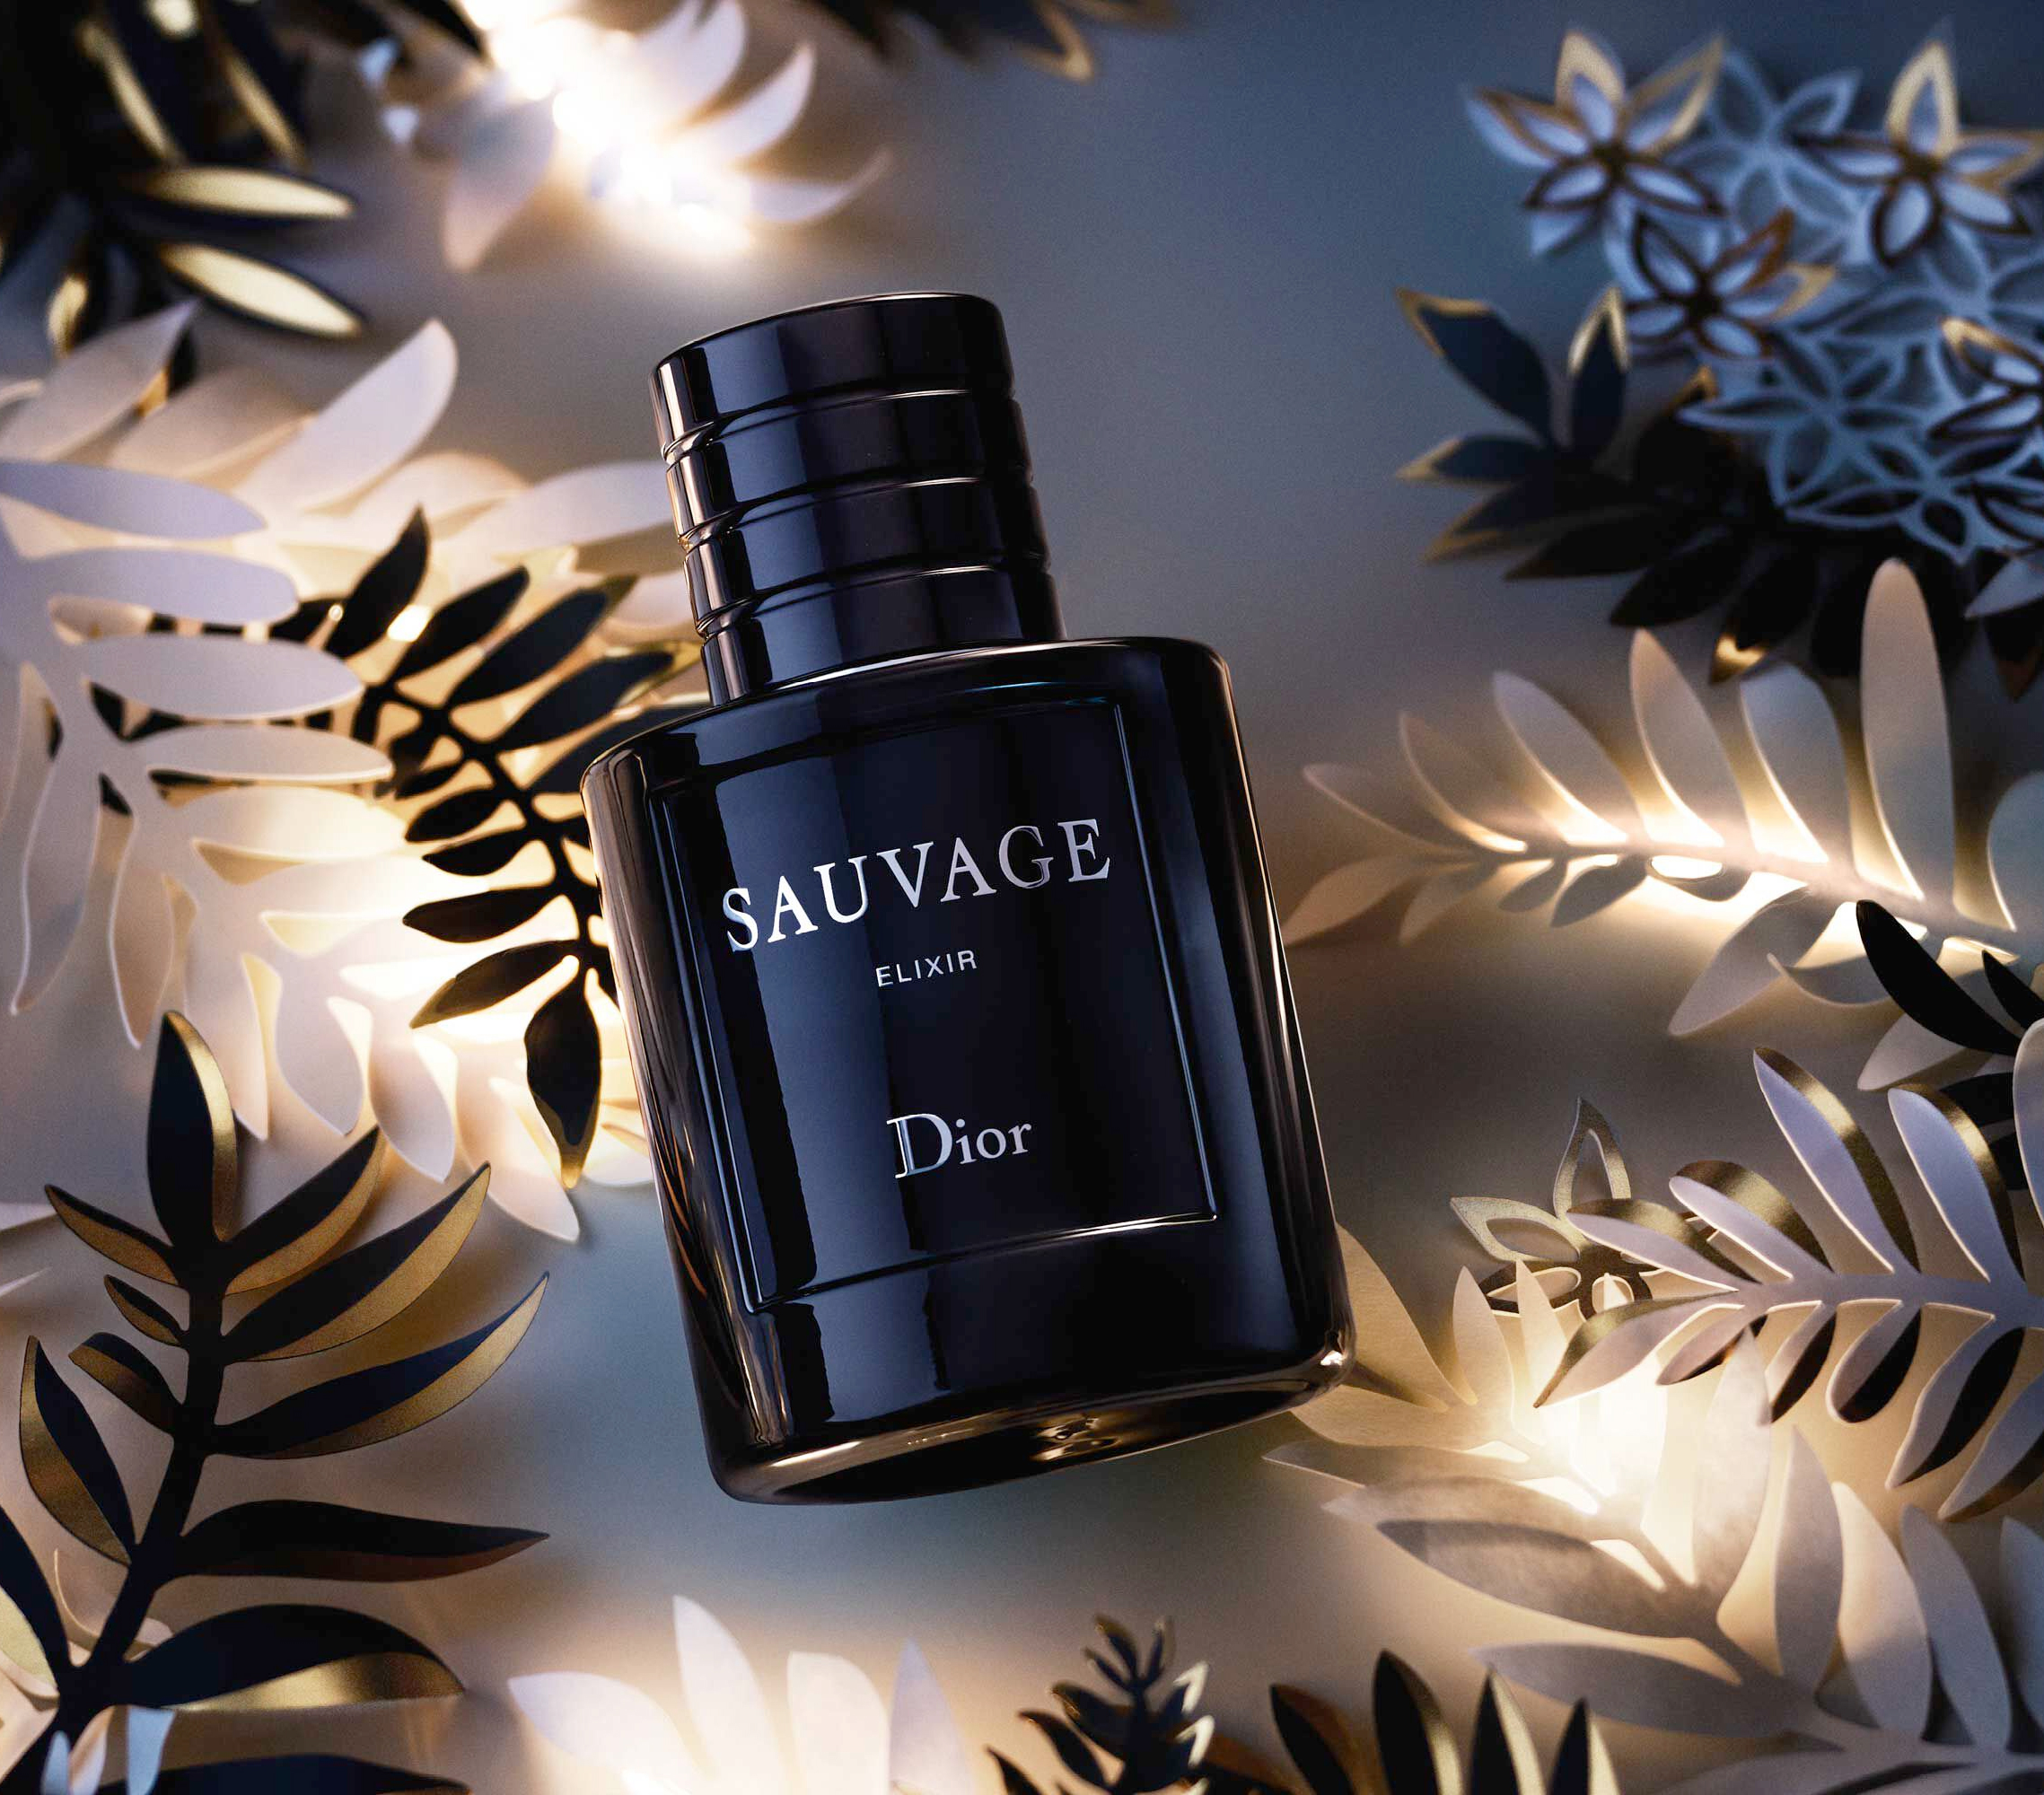 Dior Sauvage Elixir: A Stunning Rendition Of Liquorice And